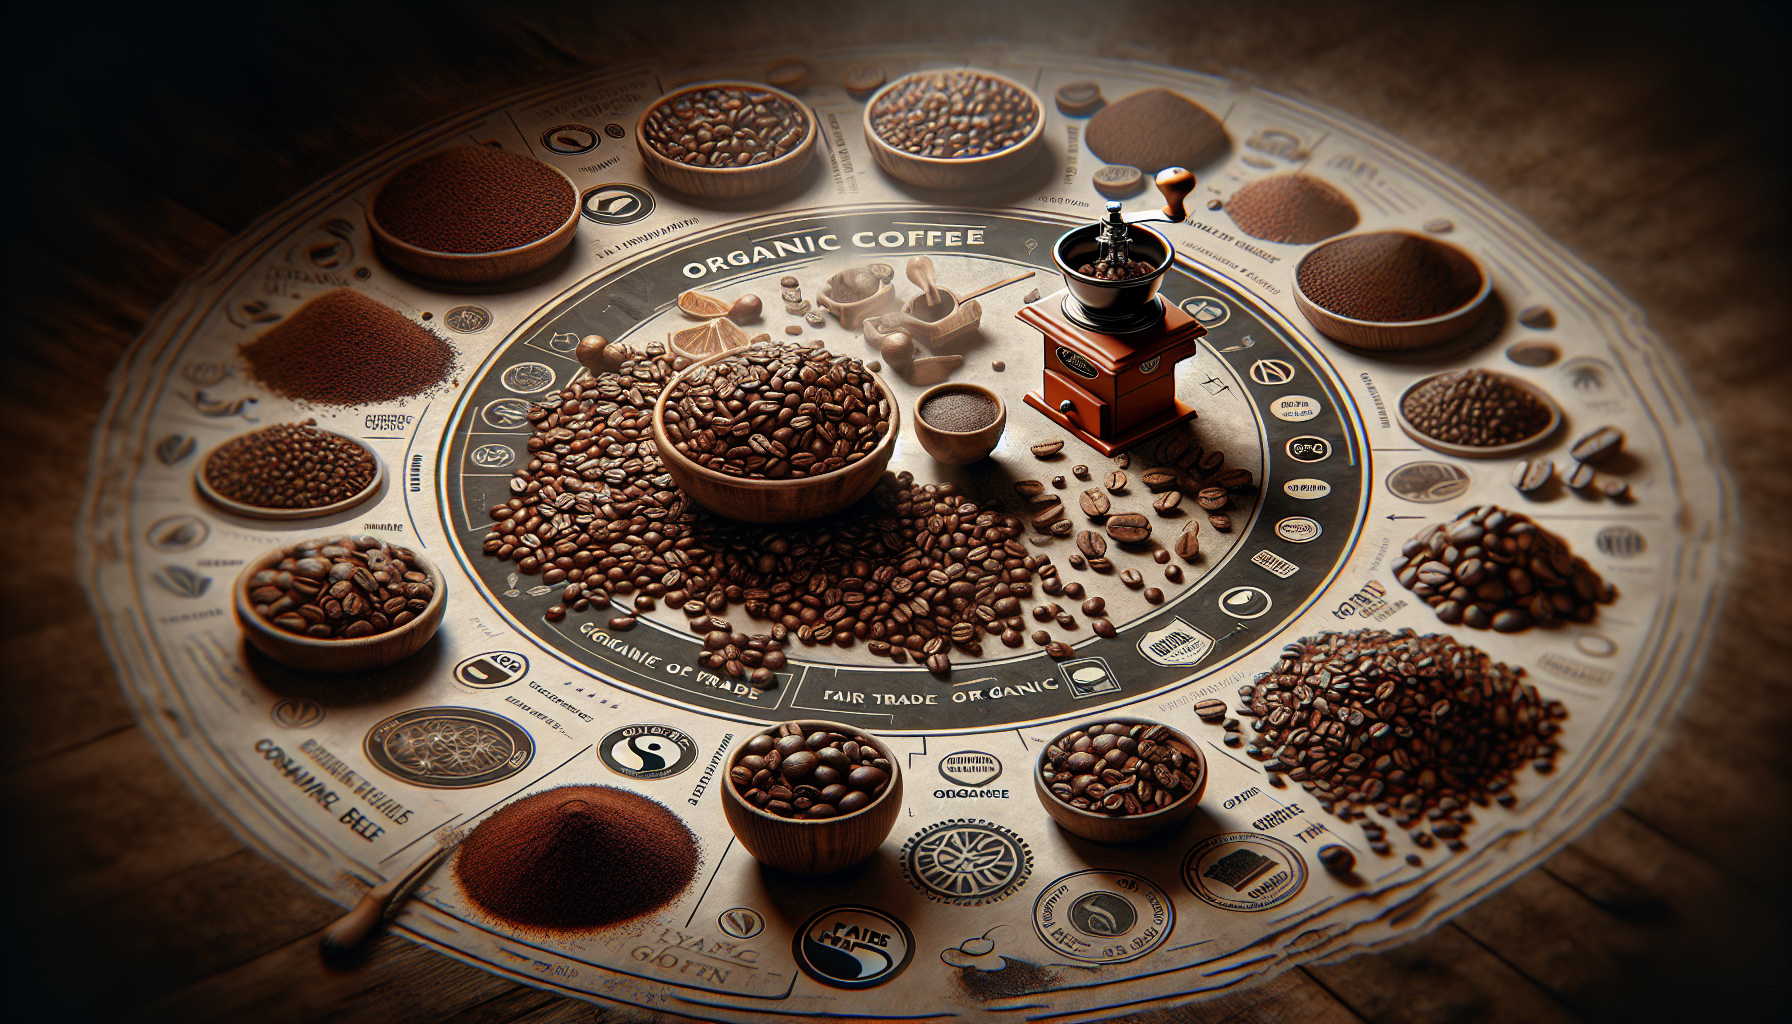 Visualize a scene where a variety of whole organic coffee beans are spread out. They are multiple shades of brown, from light to dark, and they're glossy. Some beans are cracked open, revealing the ri